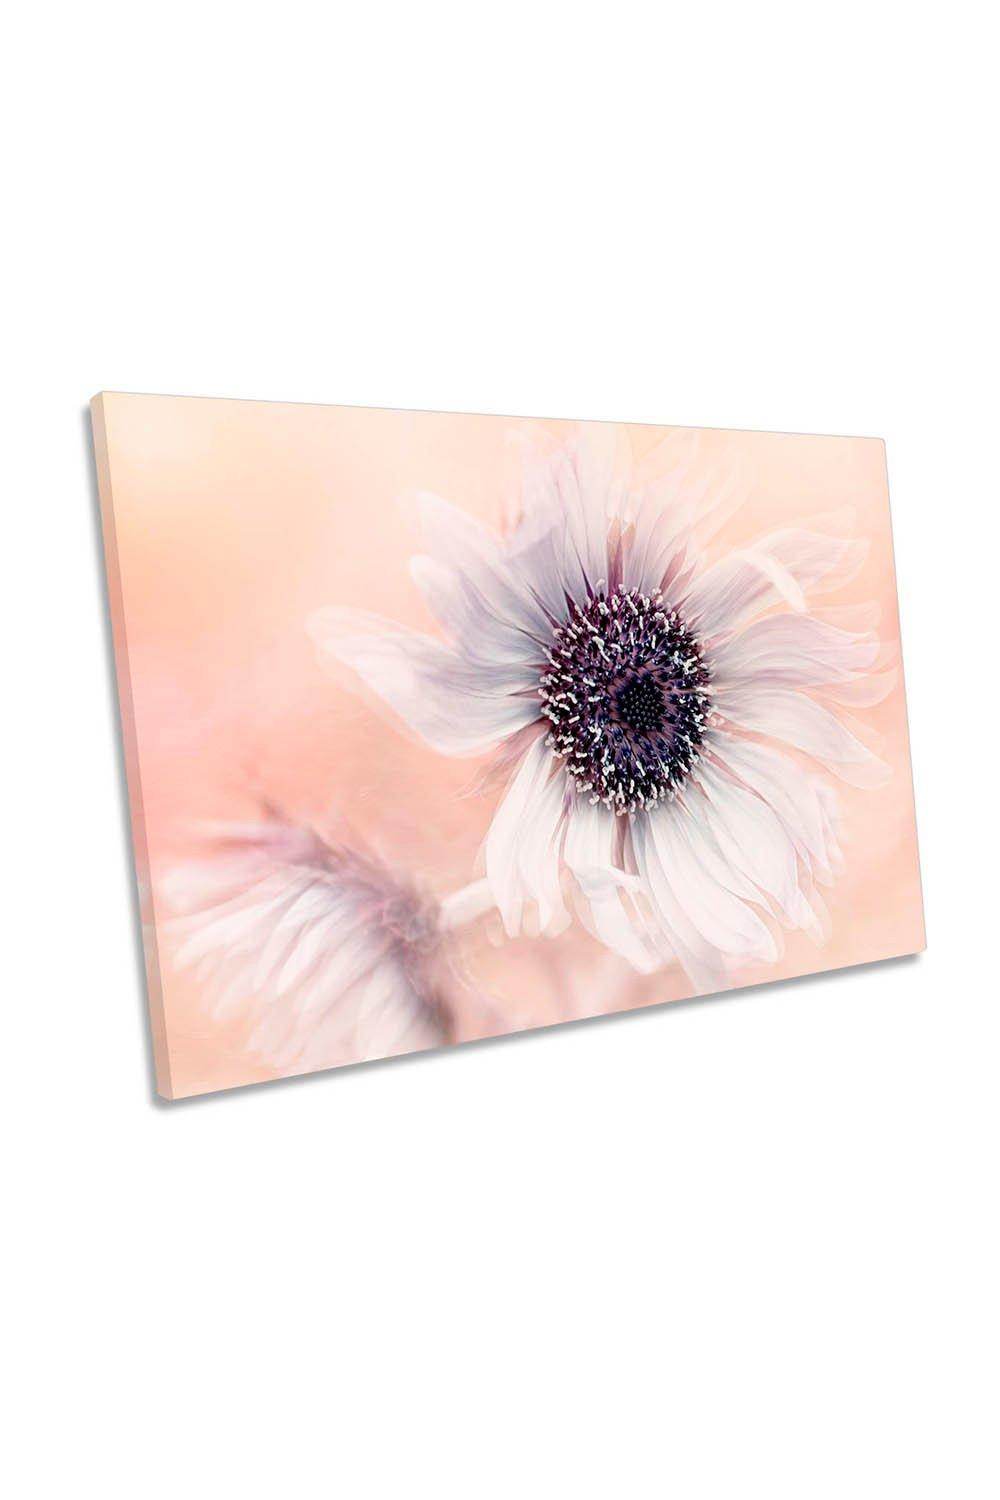 Flower Head Petals Globe Thistle Canvas Wall Art Picture Print